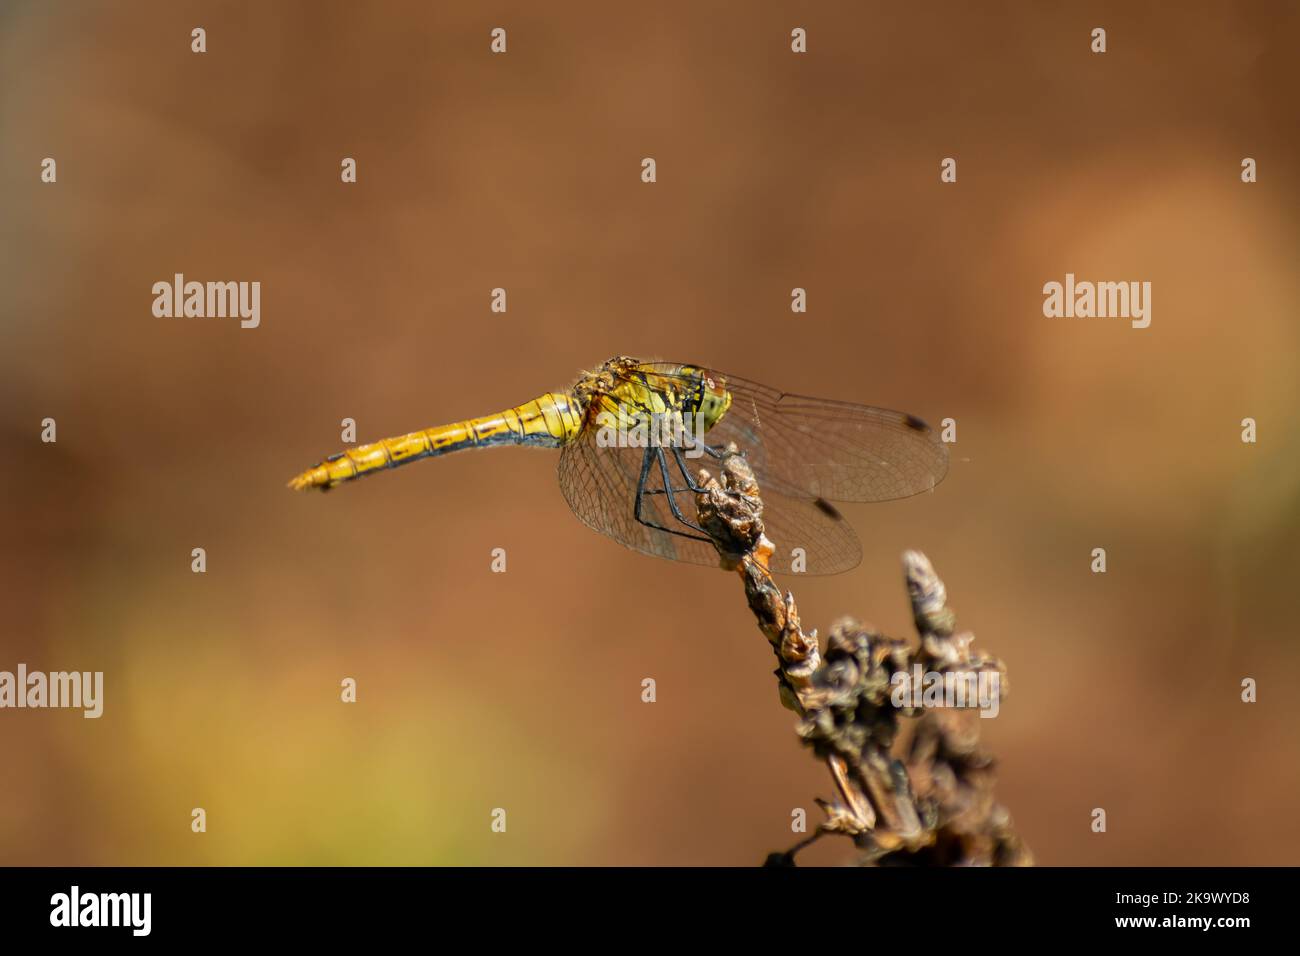 A yellow dragonfly sits on a branch, summer view Stock Photo